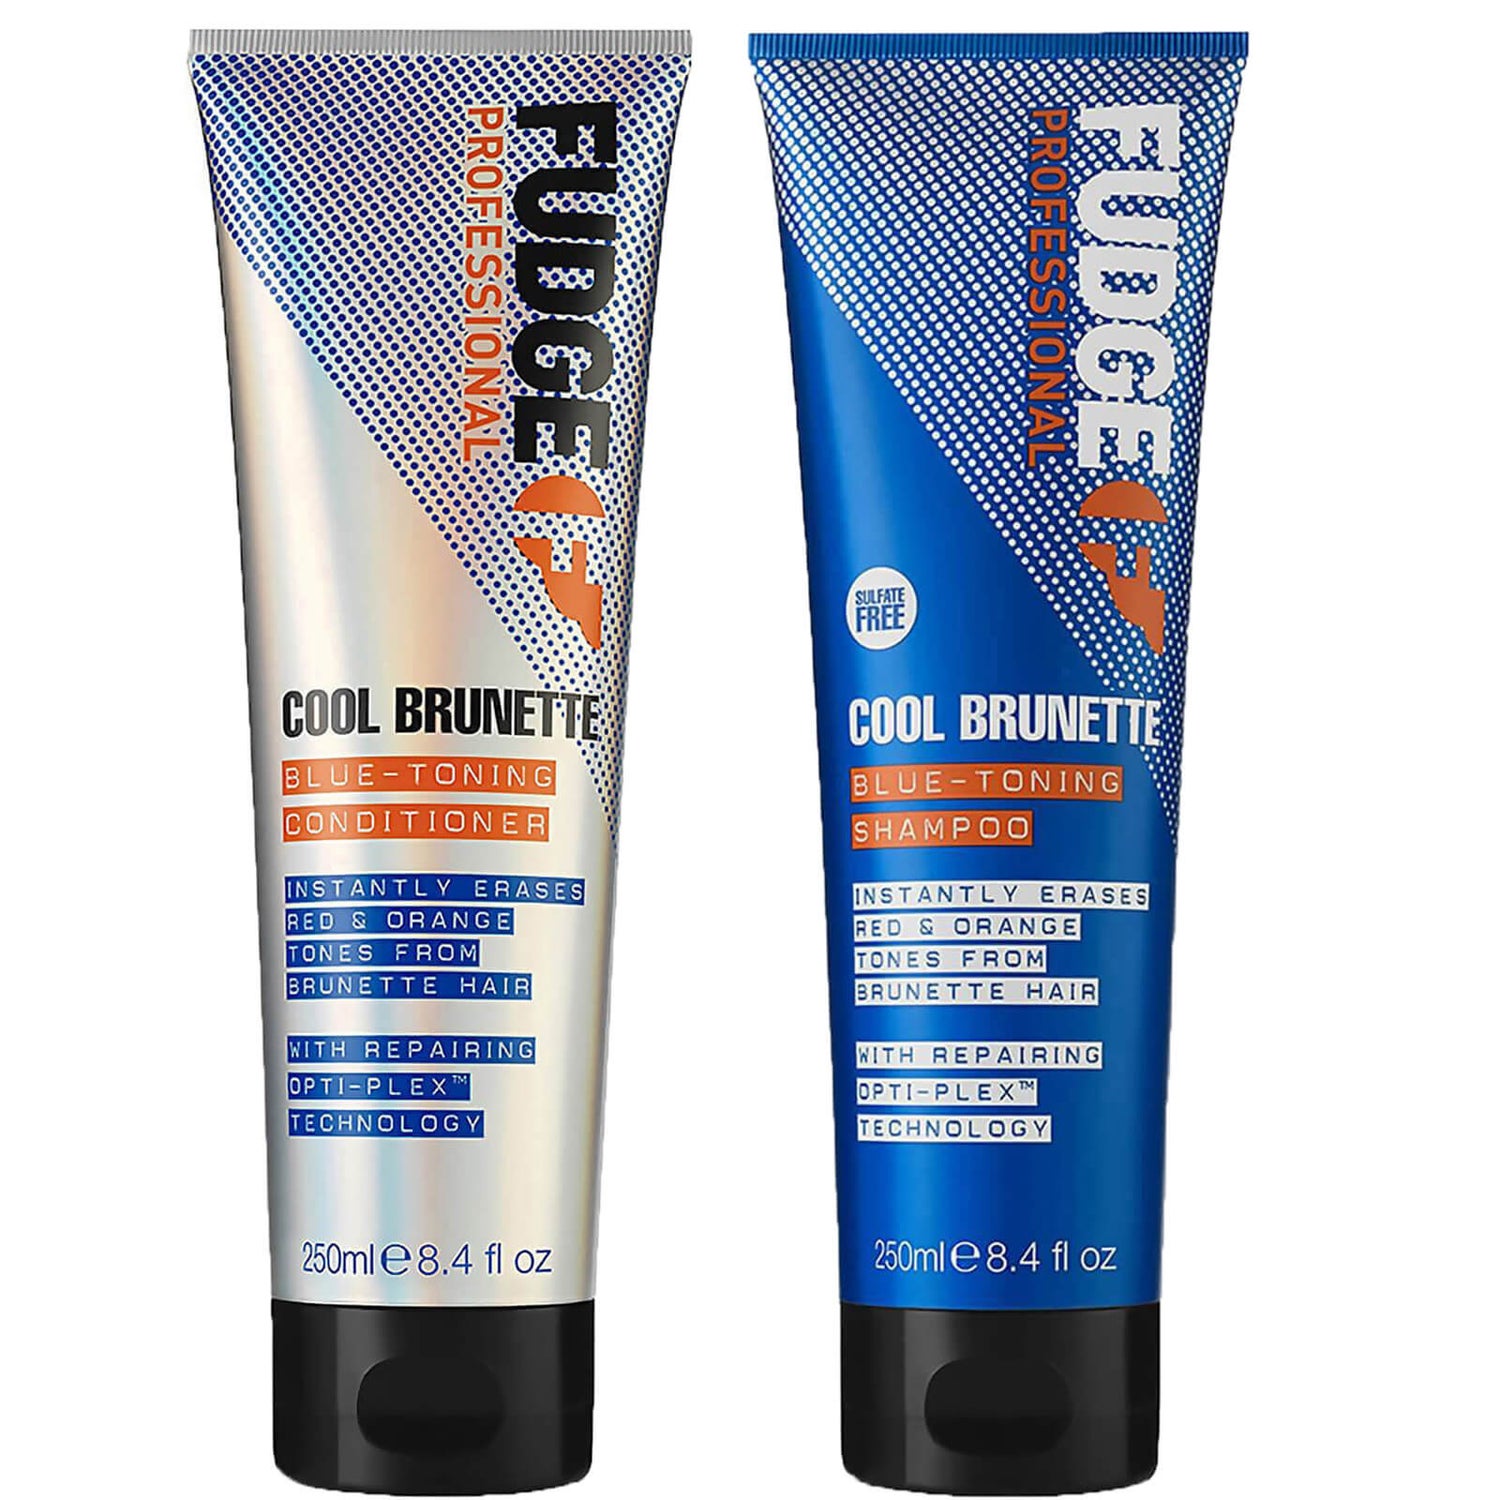 Cool Brunette Blue Toning Shampoo and Conditioner 250ml